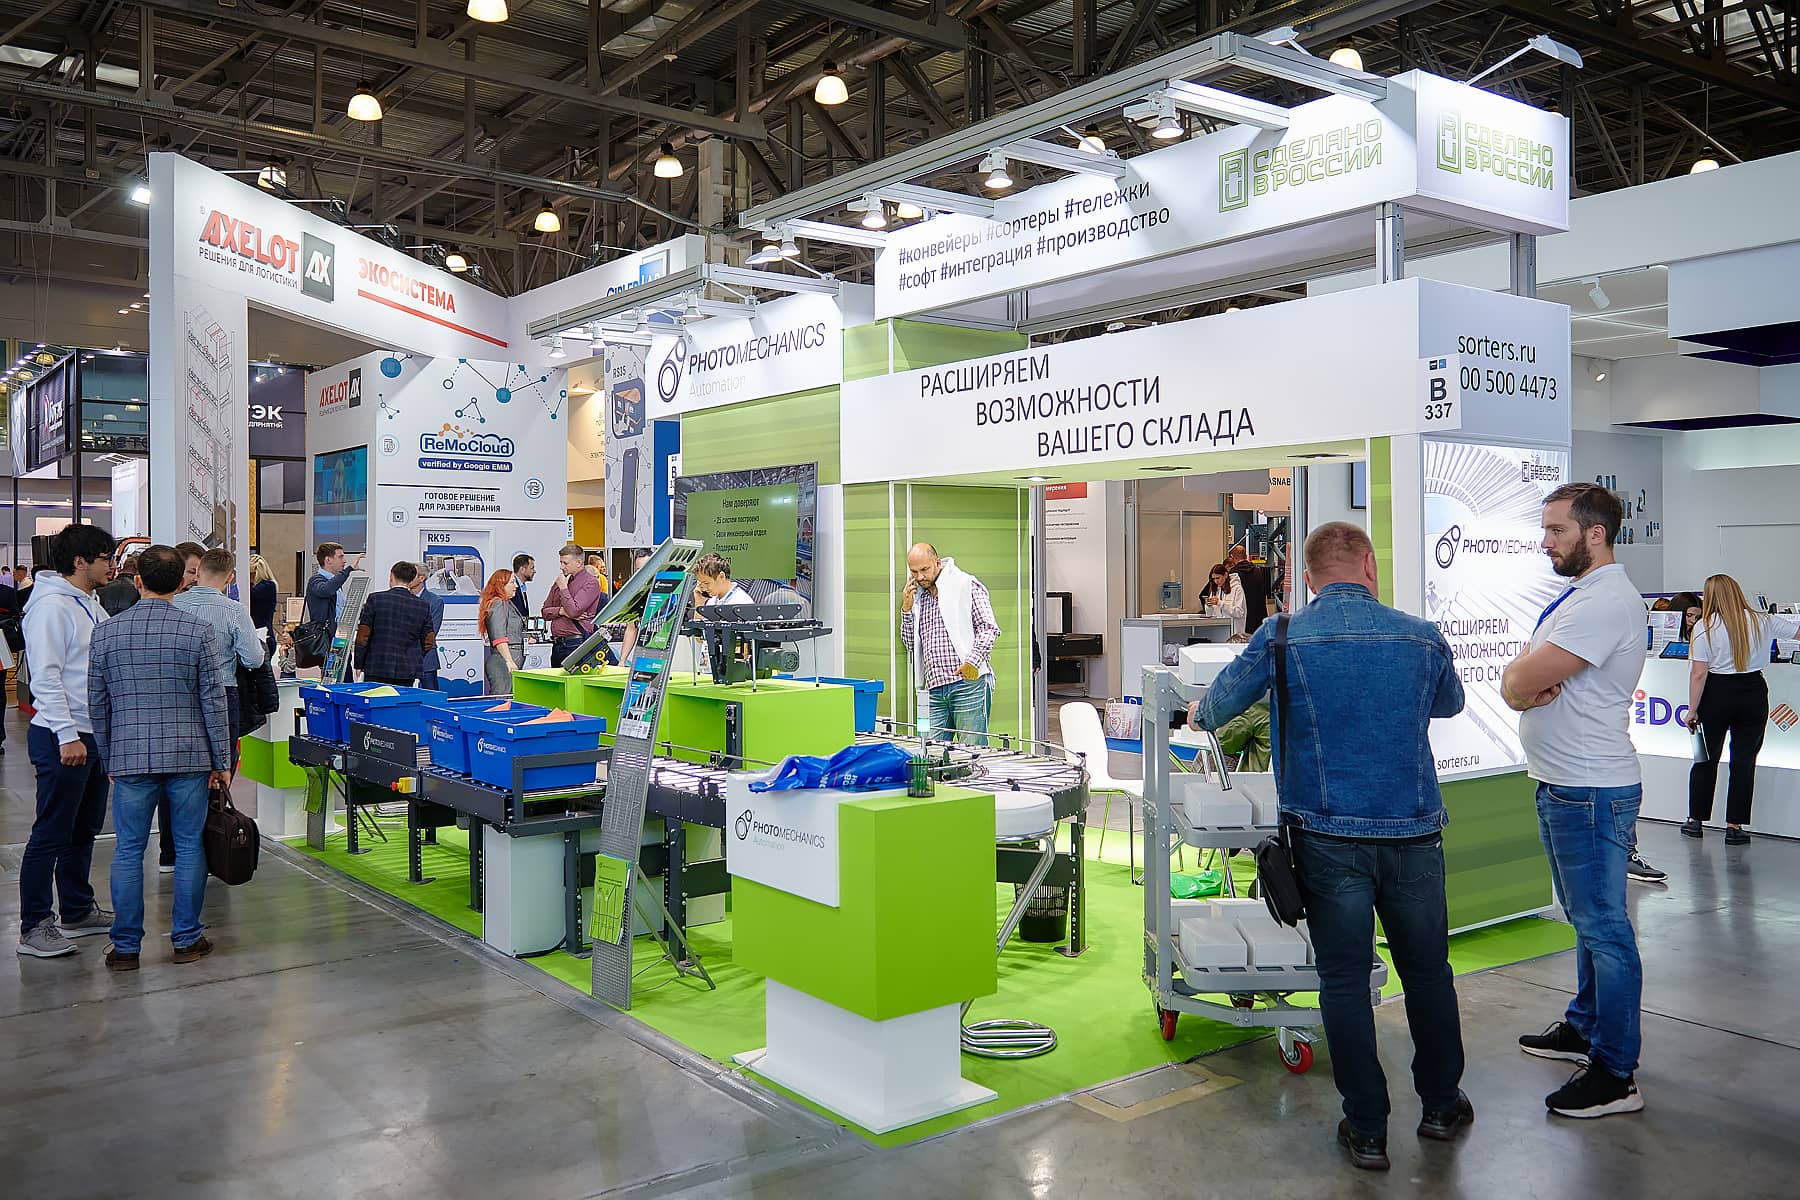 Photomechanics took part in CeMAT RUSSIA 2022